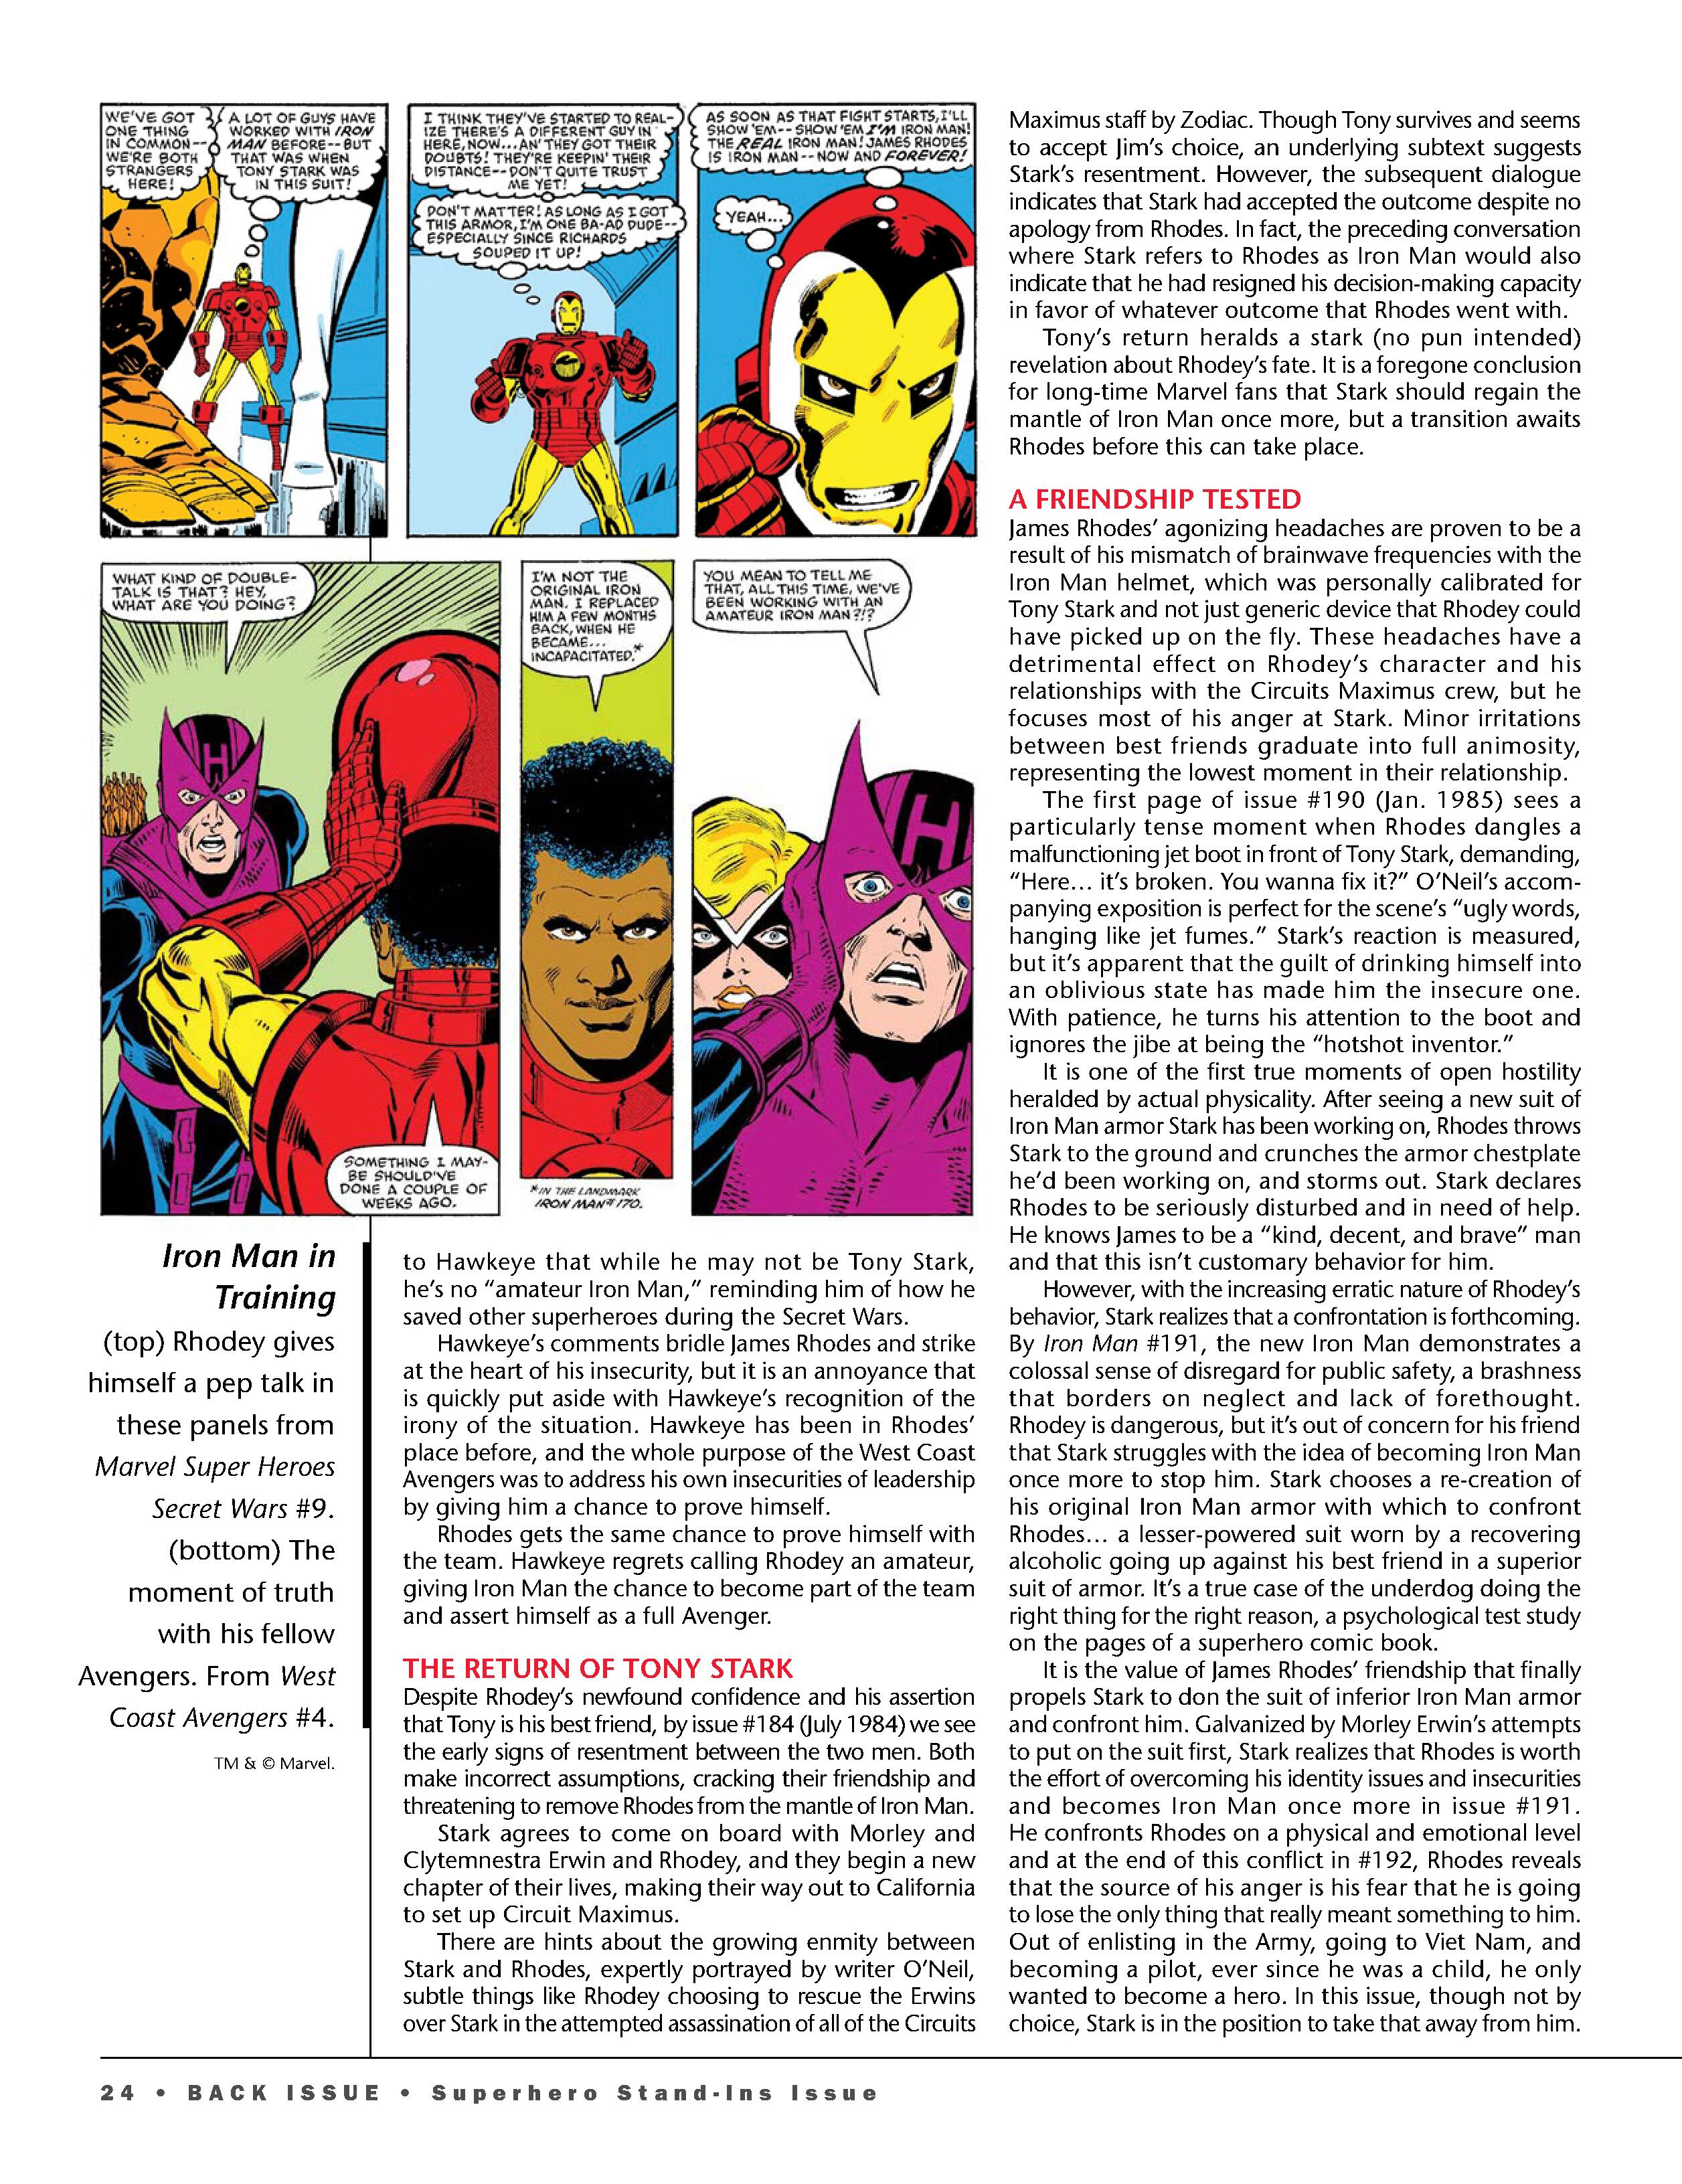 Read online Back Issue comic -  Issue #117 - 26